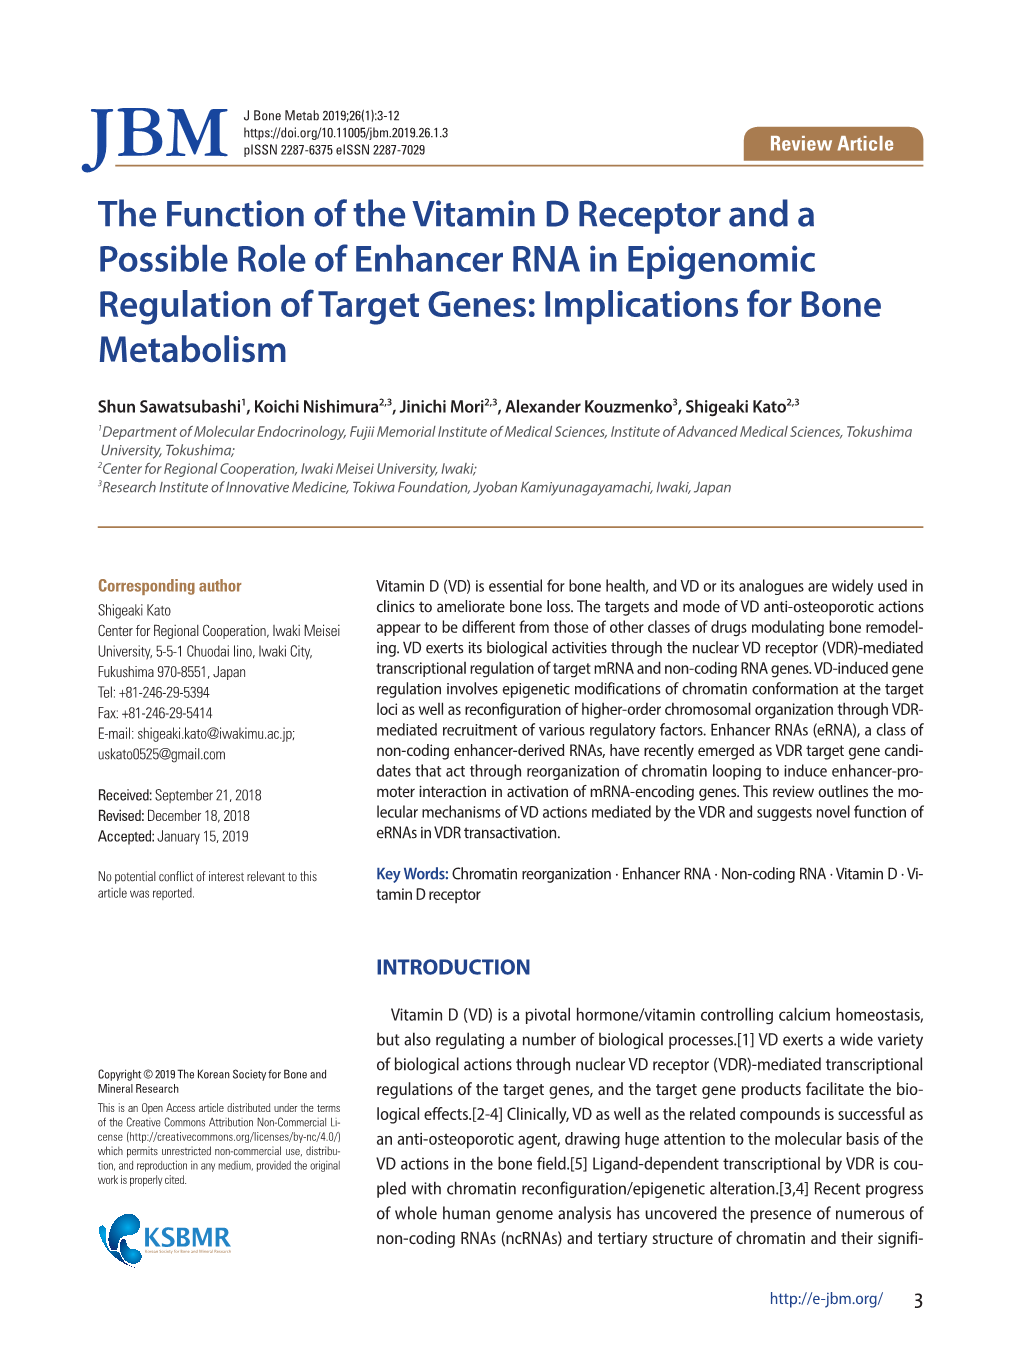 The Function of the Vitamin D Receptor and a Possible Role of Enhancer RNA in Epigenomic Regulation of Target Genes: Implications for Bone Metabolism